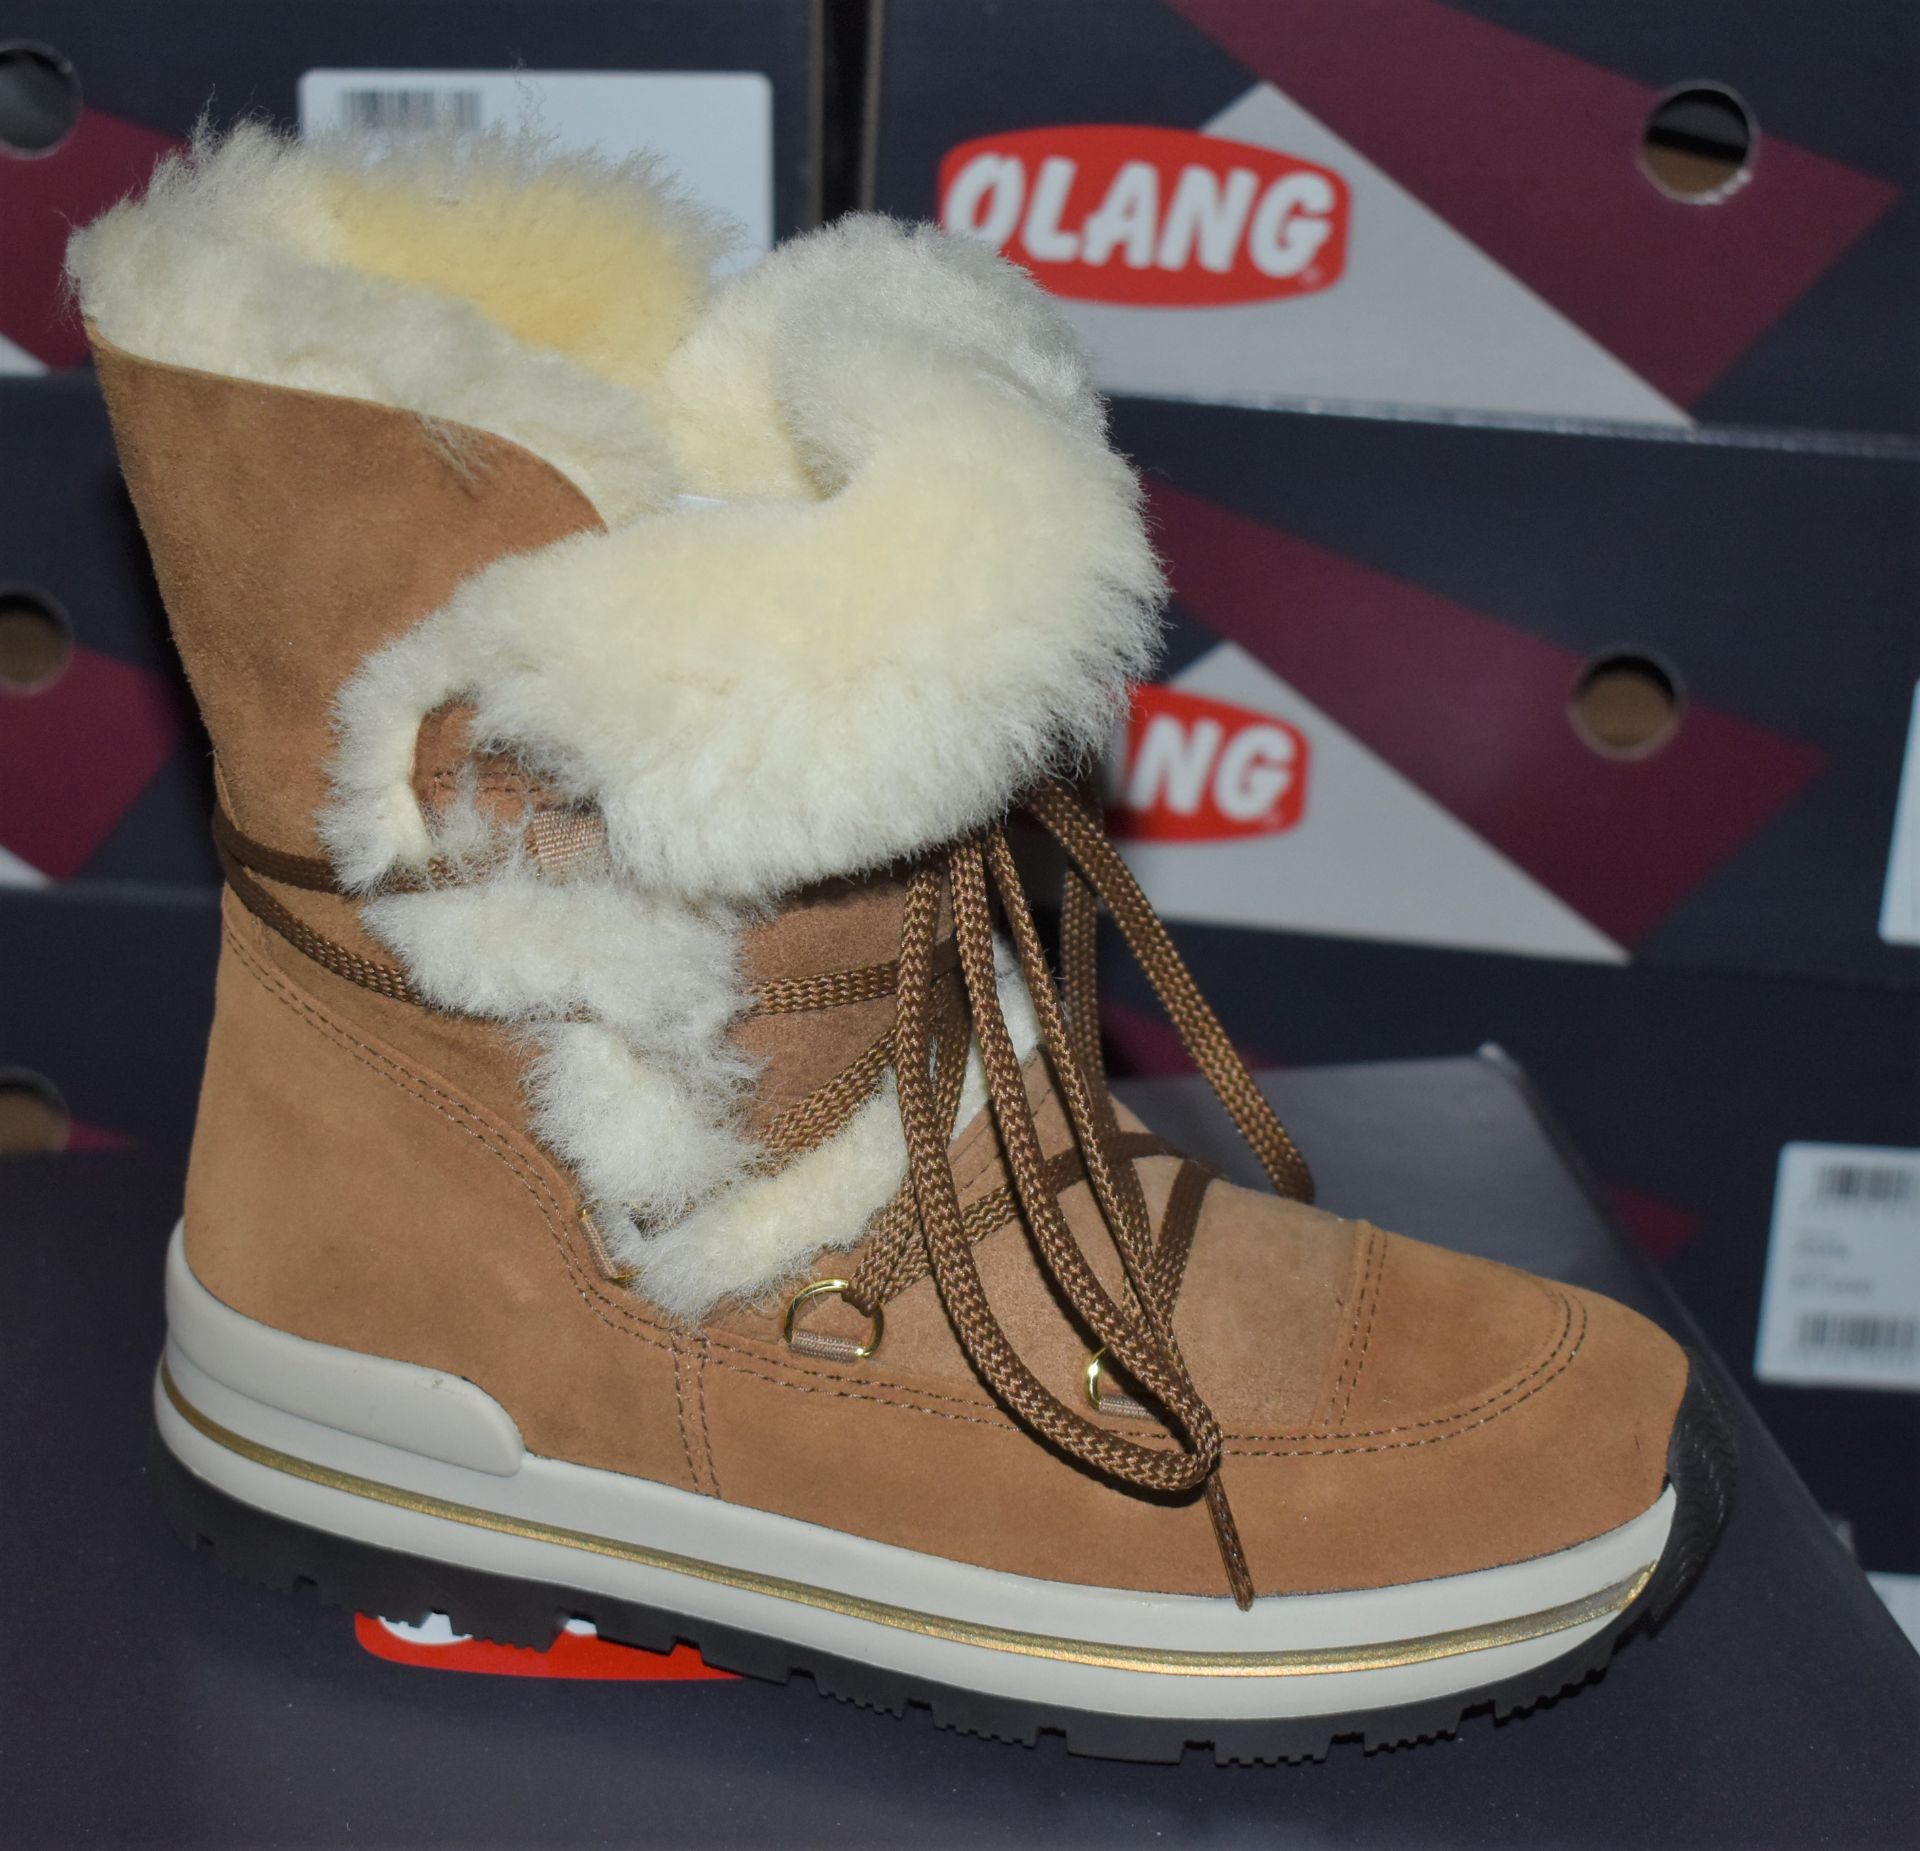 1 x Pair of Designer Olang Aurora 85 CUOIO Women's Winter Boots - Euro Size 38 - Brand New Boxed